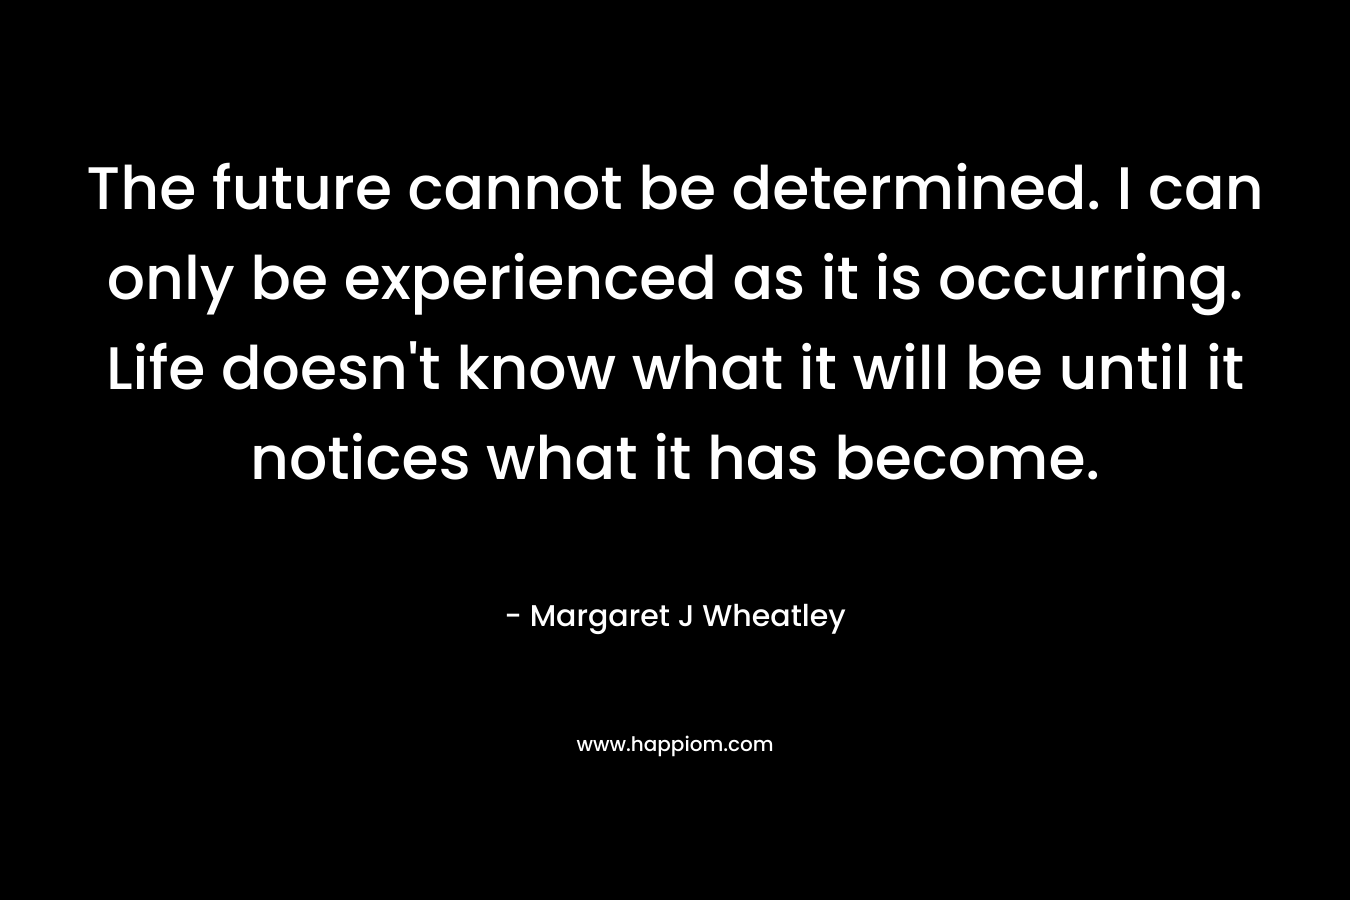 The future cannot be determined. I can only be experienced as it is occurring. Life doesn’t know what it will be until it notices what it has become. – Margaret J Wheatley